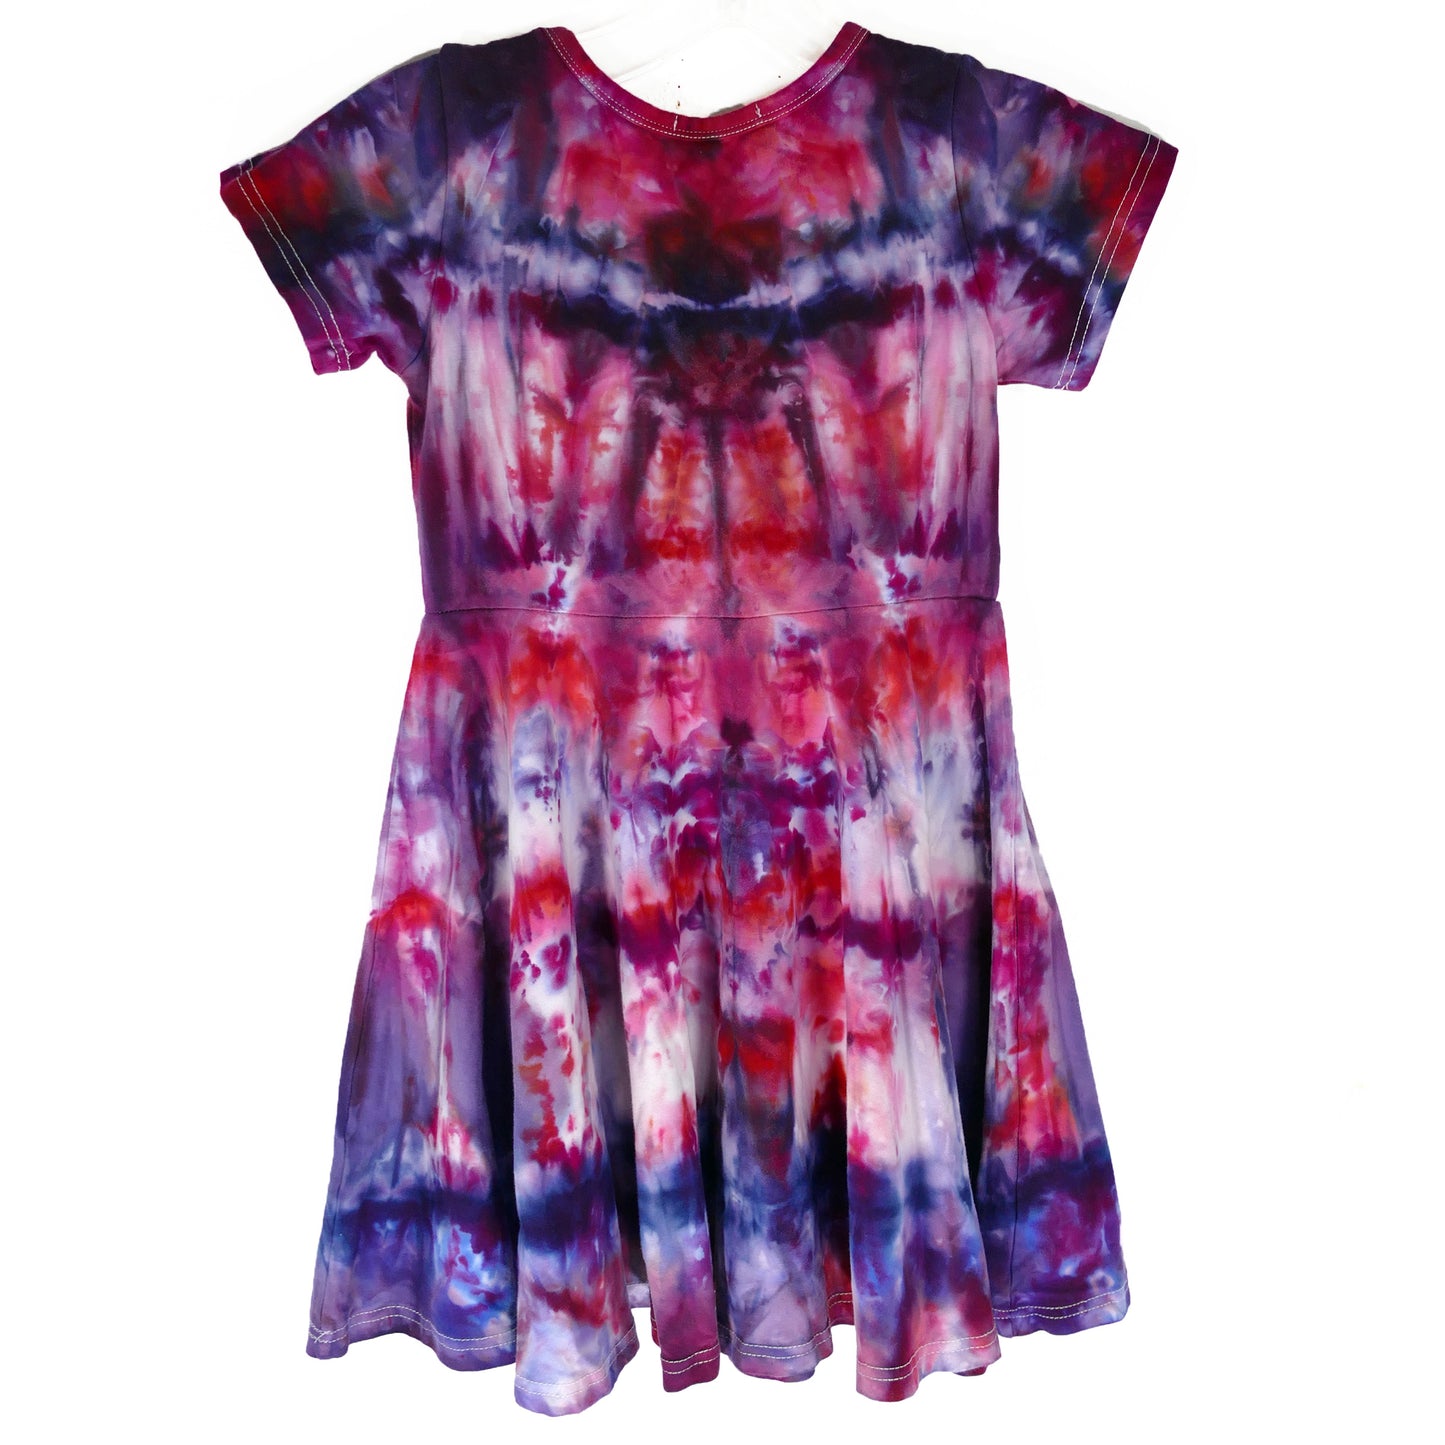 TIE-DYED girls dress size 8-9 yrs Youth size